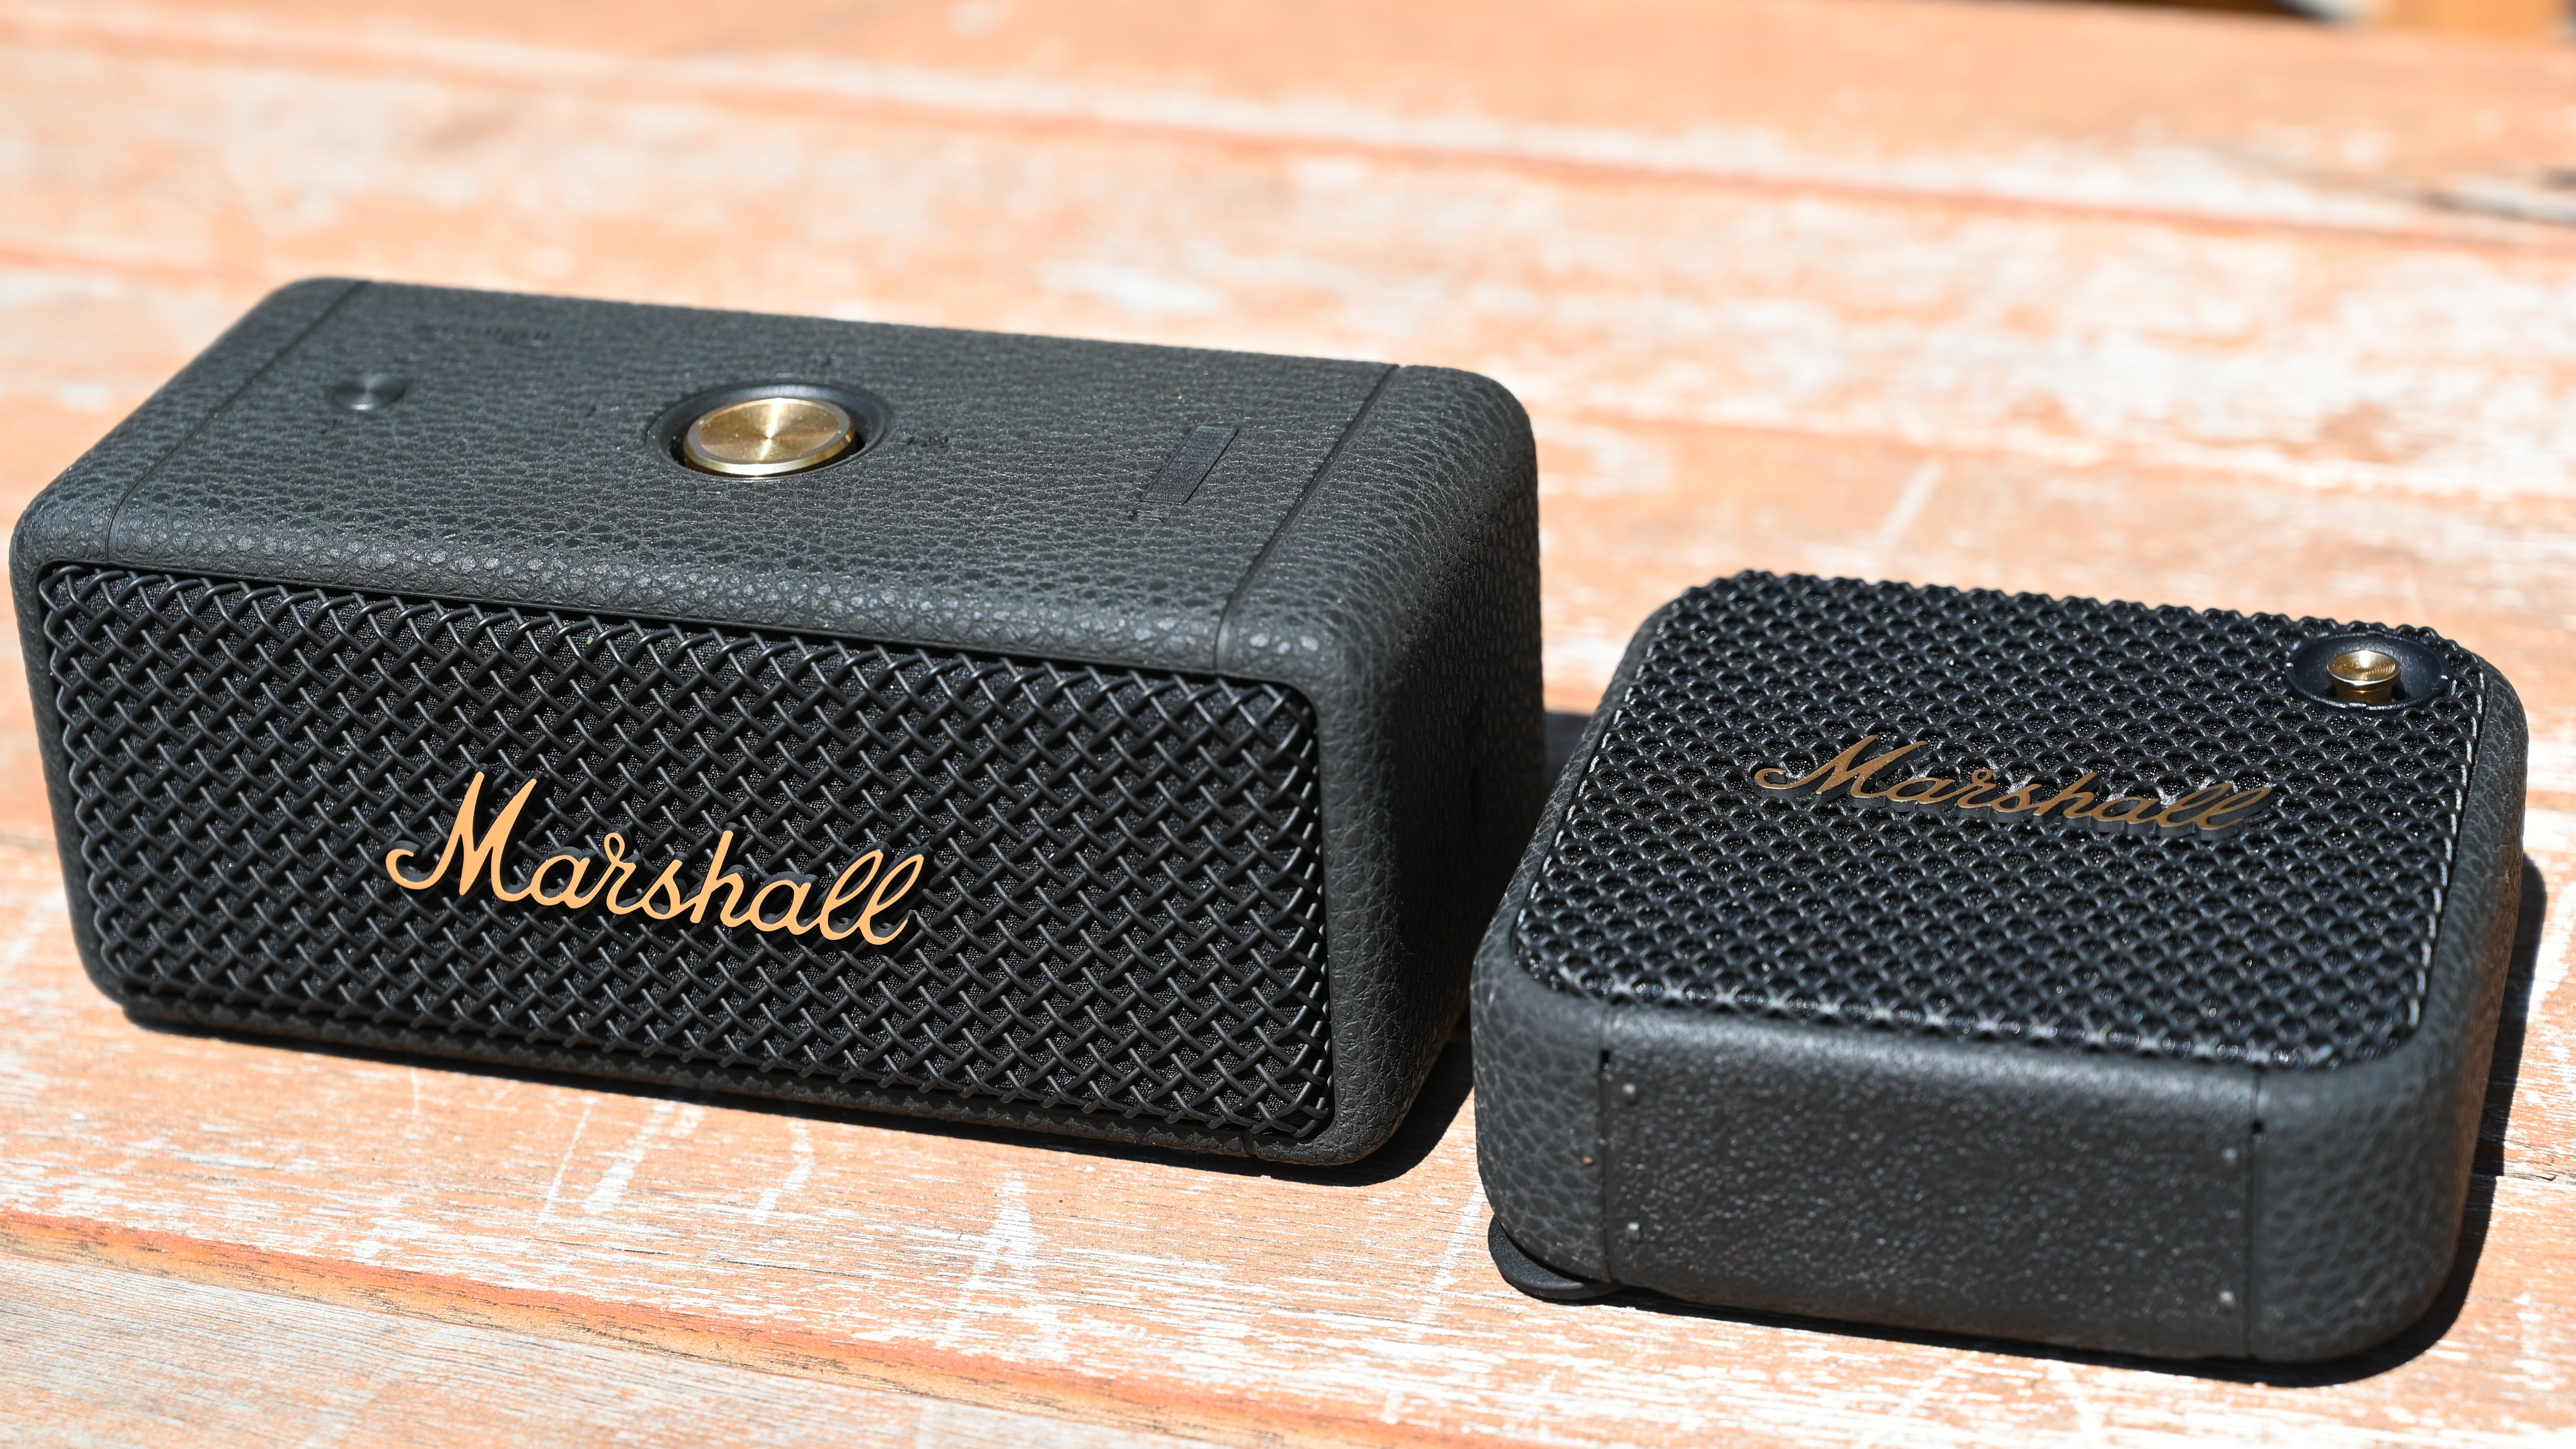 Marshall Emberton II and Willen review: Go anywhere in style